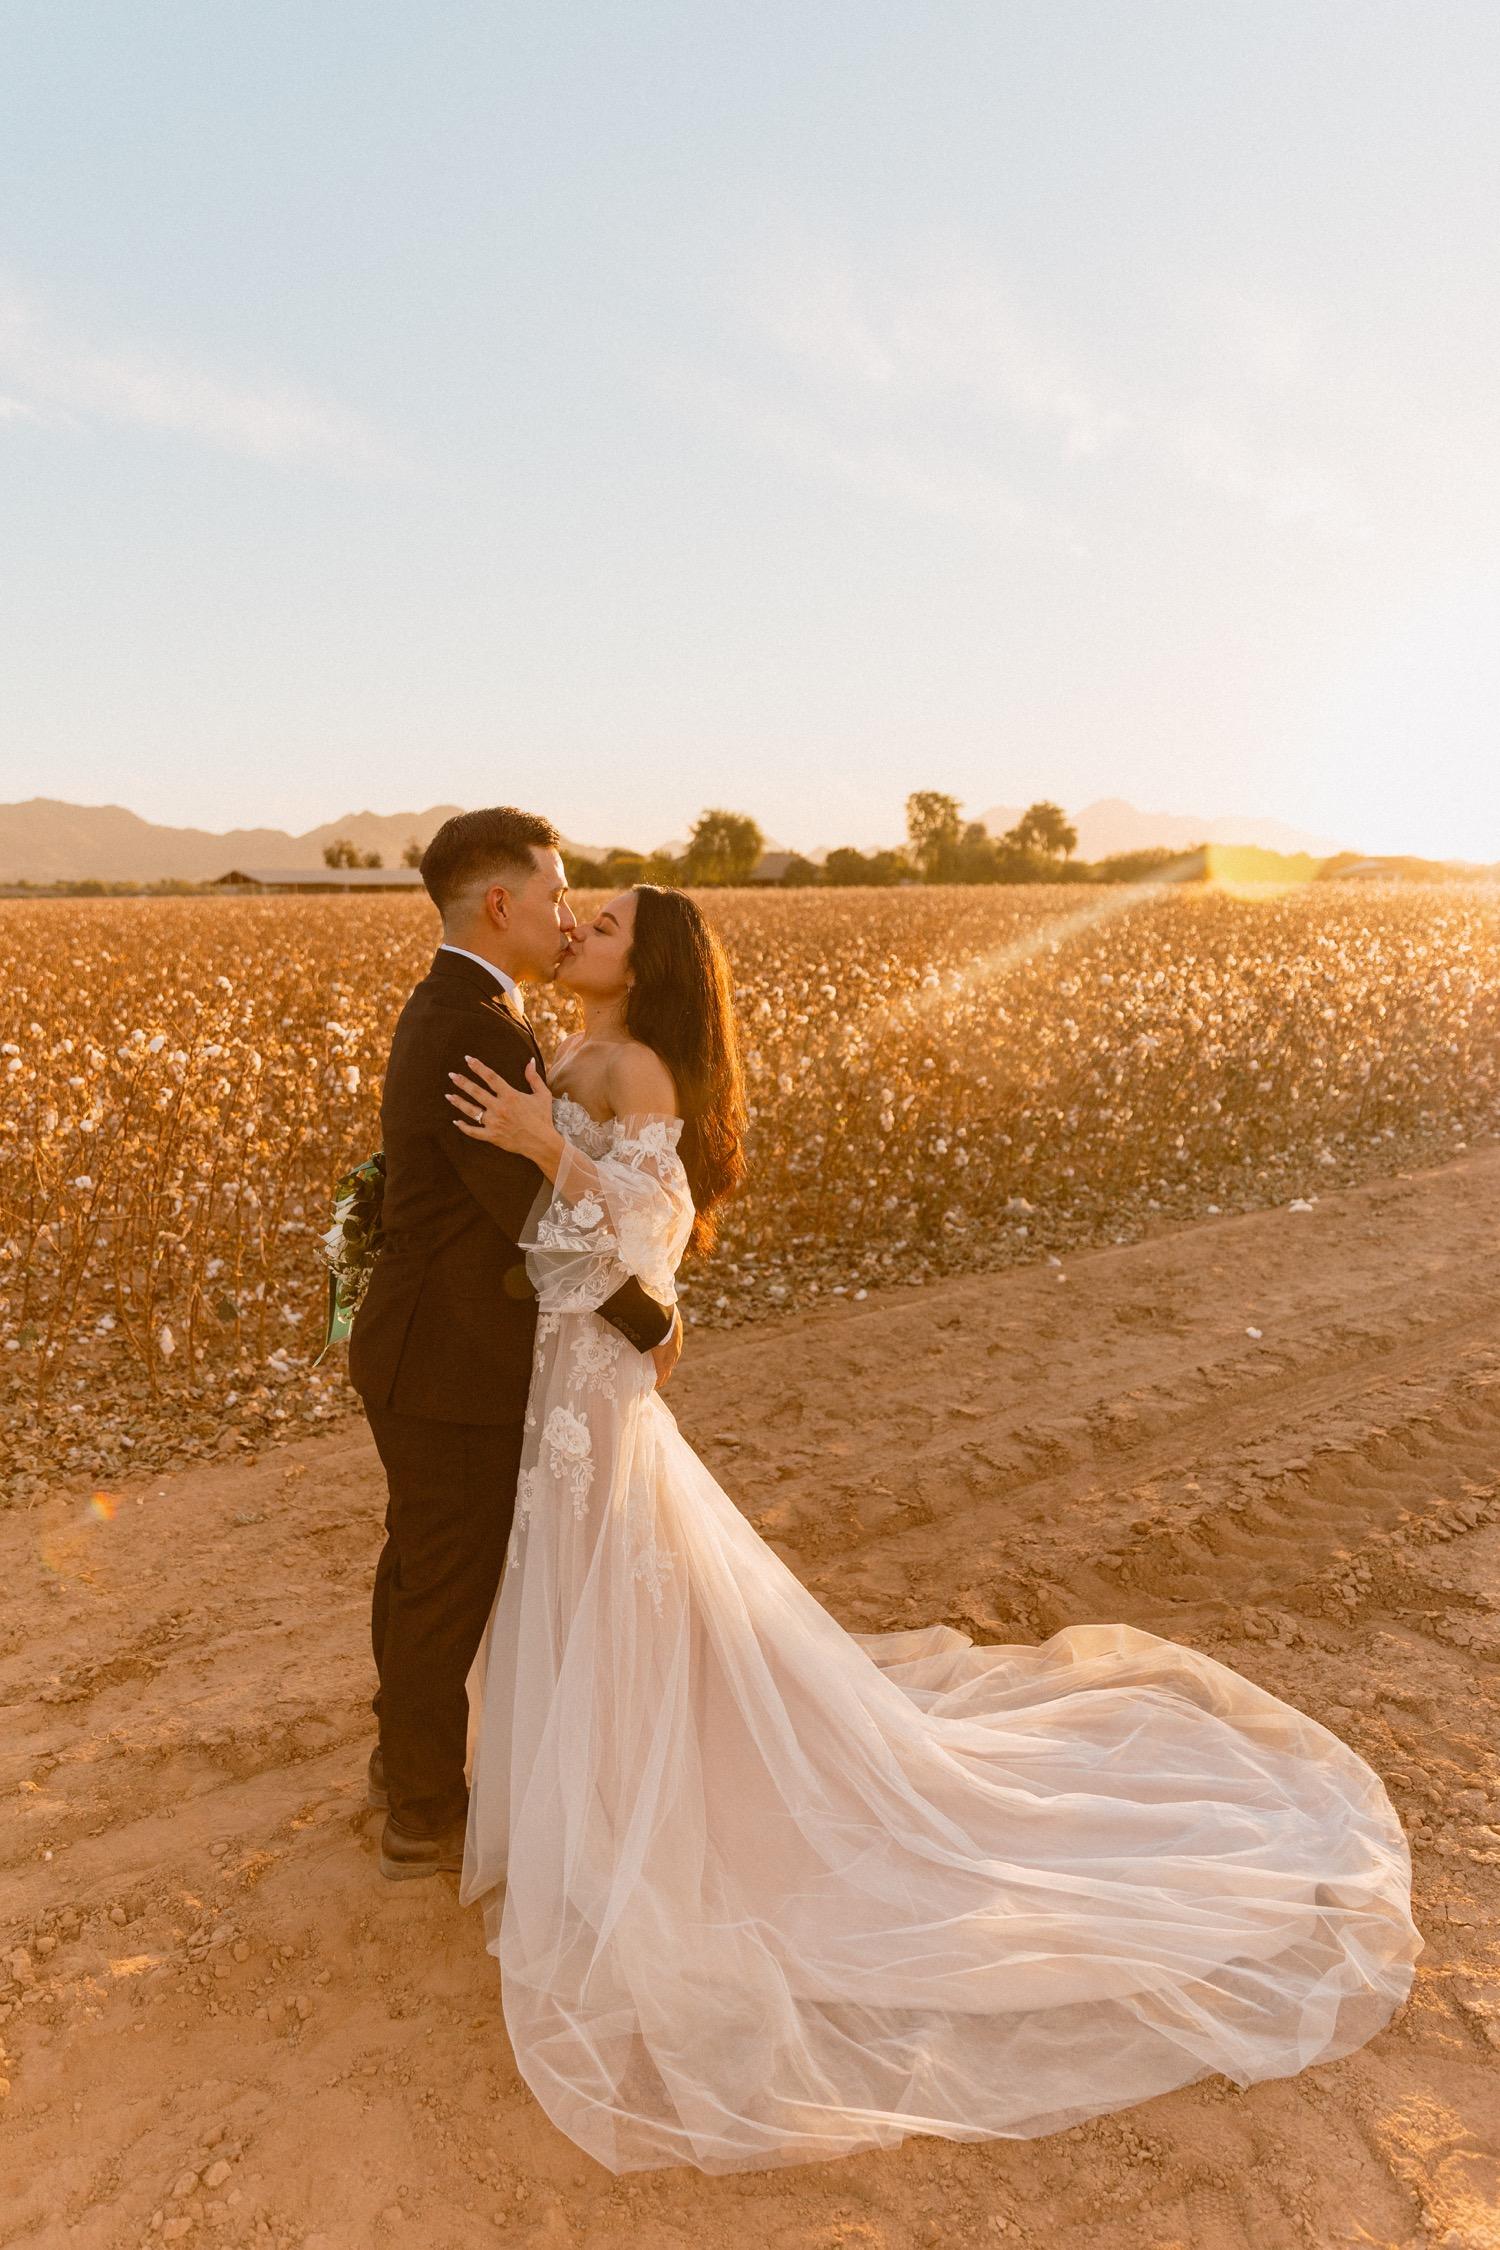 Fairytale natural backyard wedding photos taken during golden hour with the bride and groom poses on their big day in Gilbert Arizona